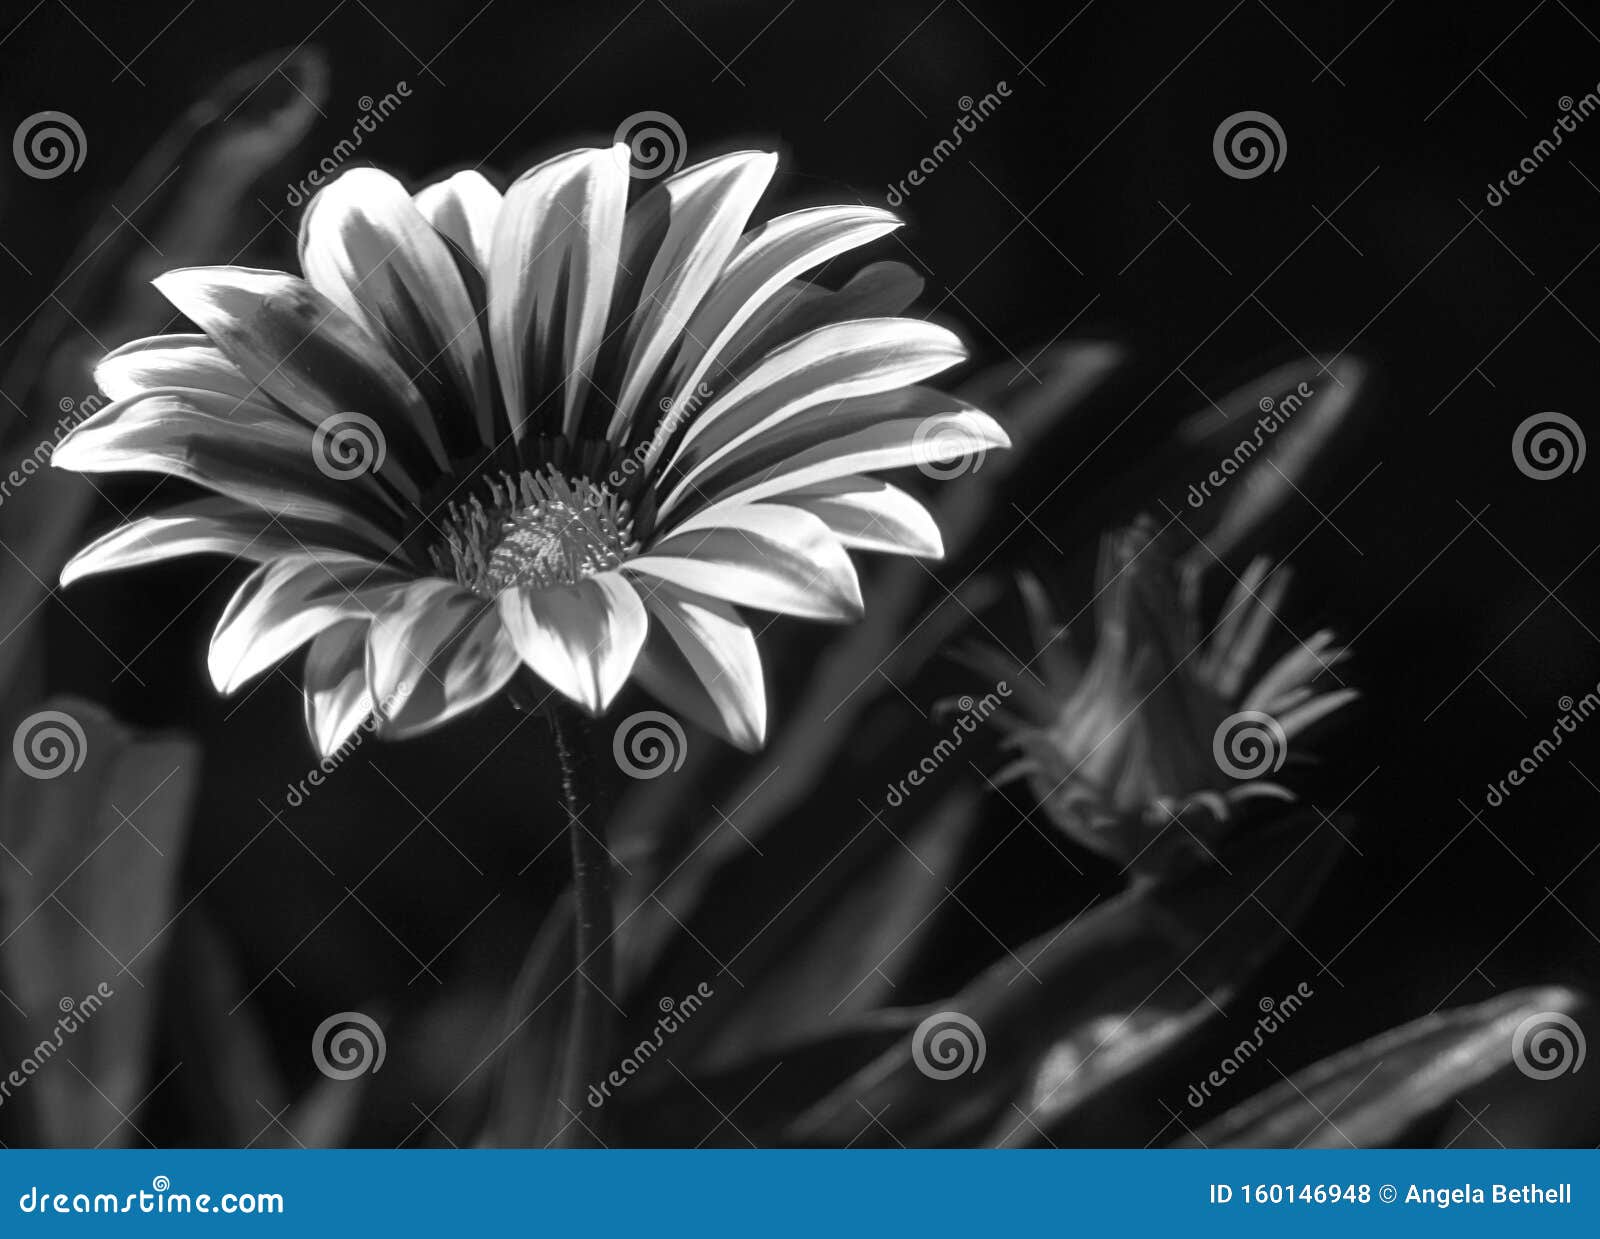 Daisy Flower in Black and White Stock Photo - Image of black, leaf ...